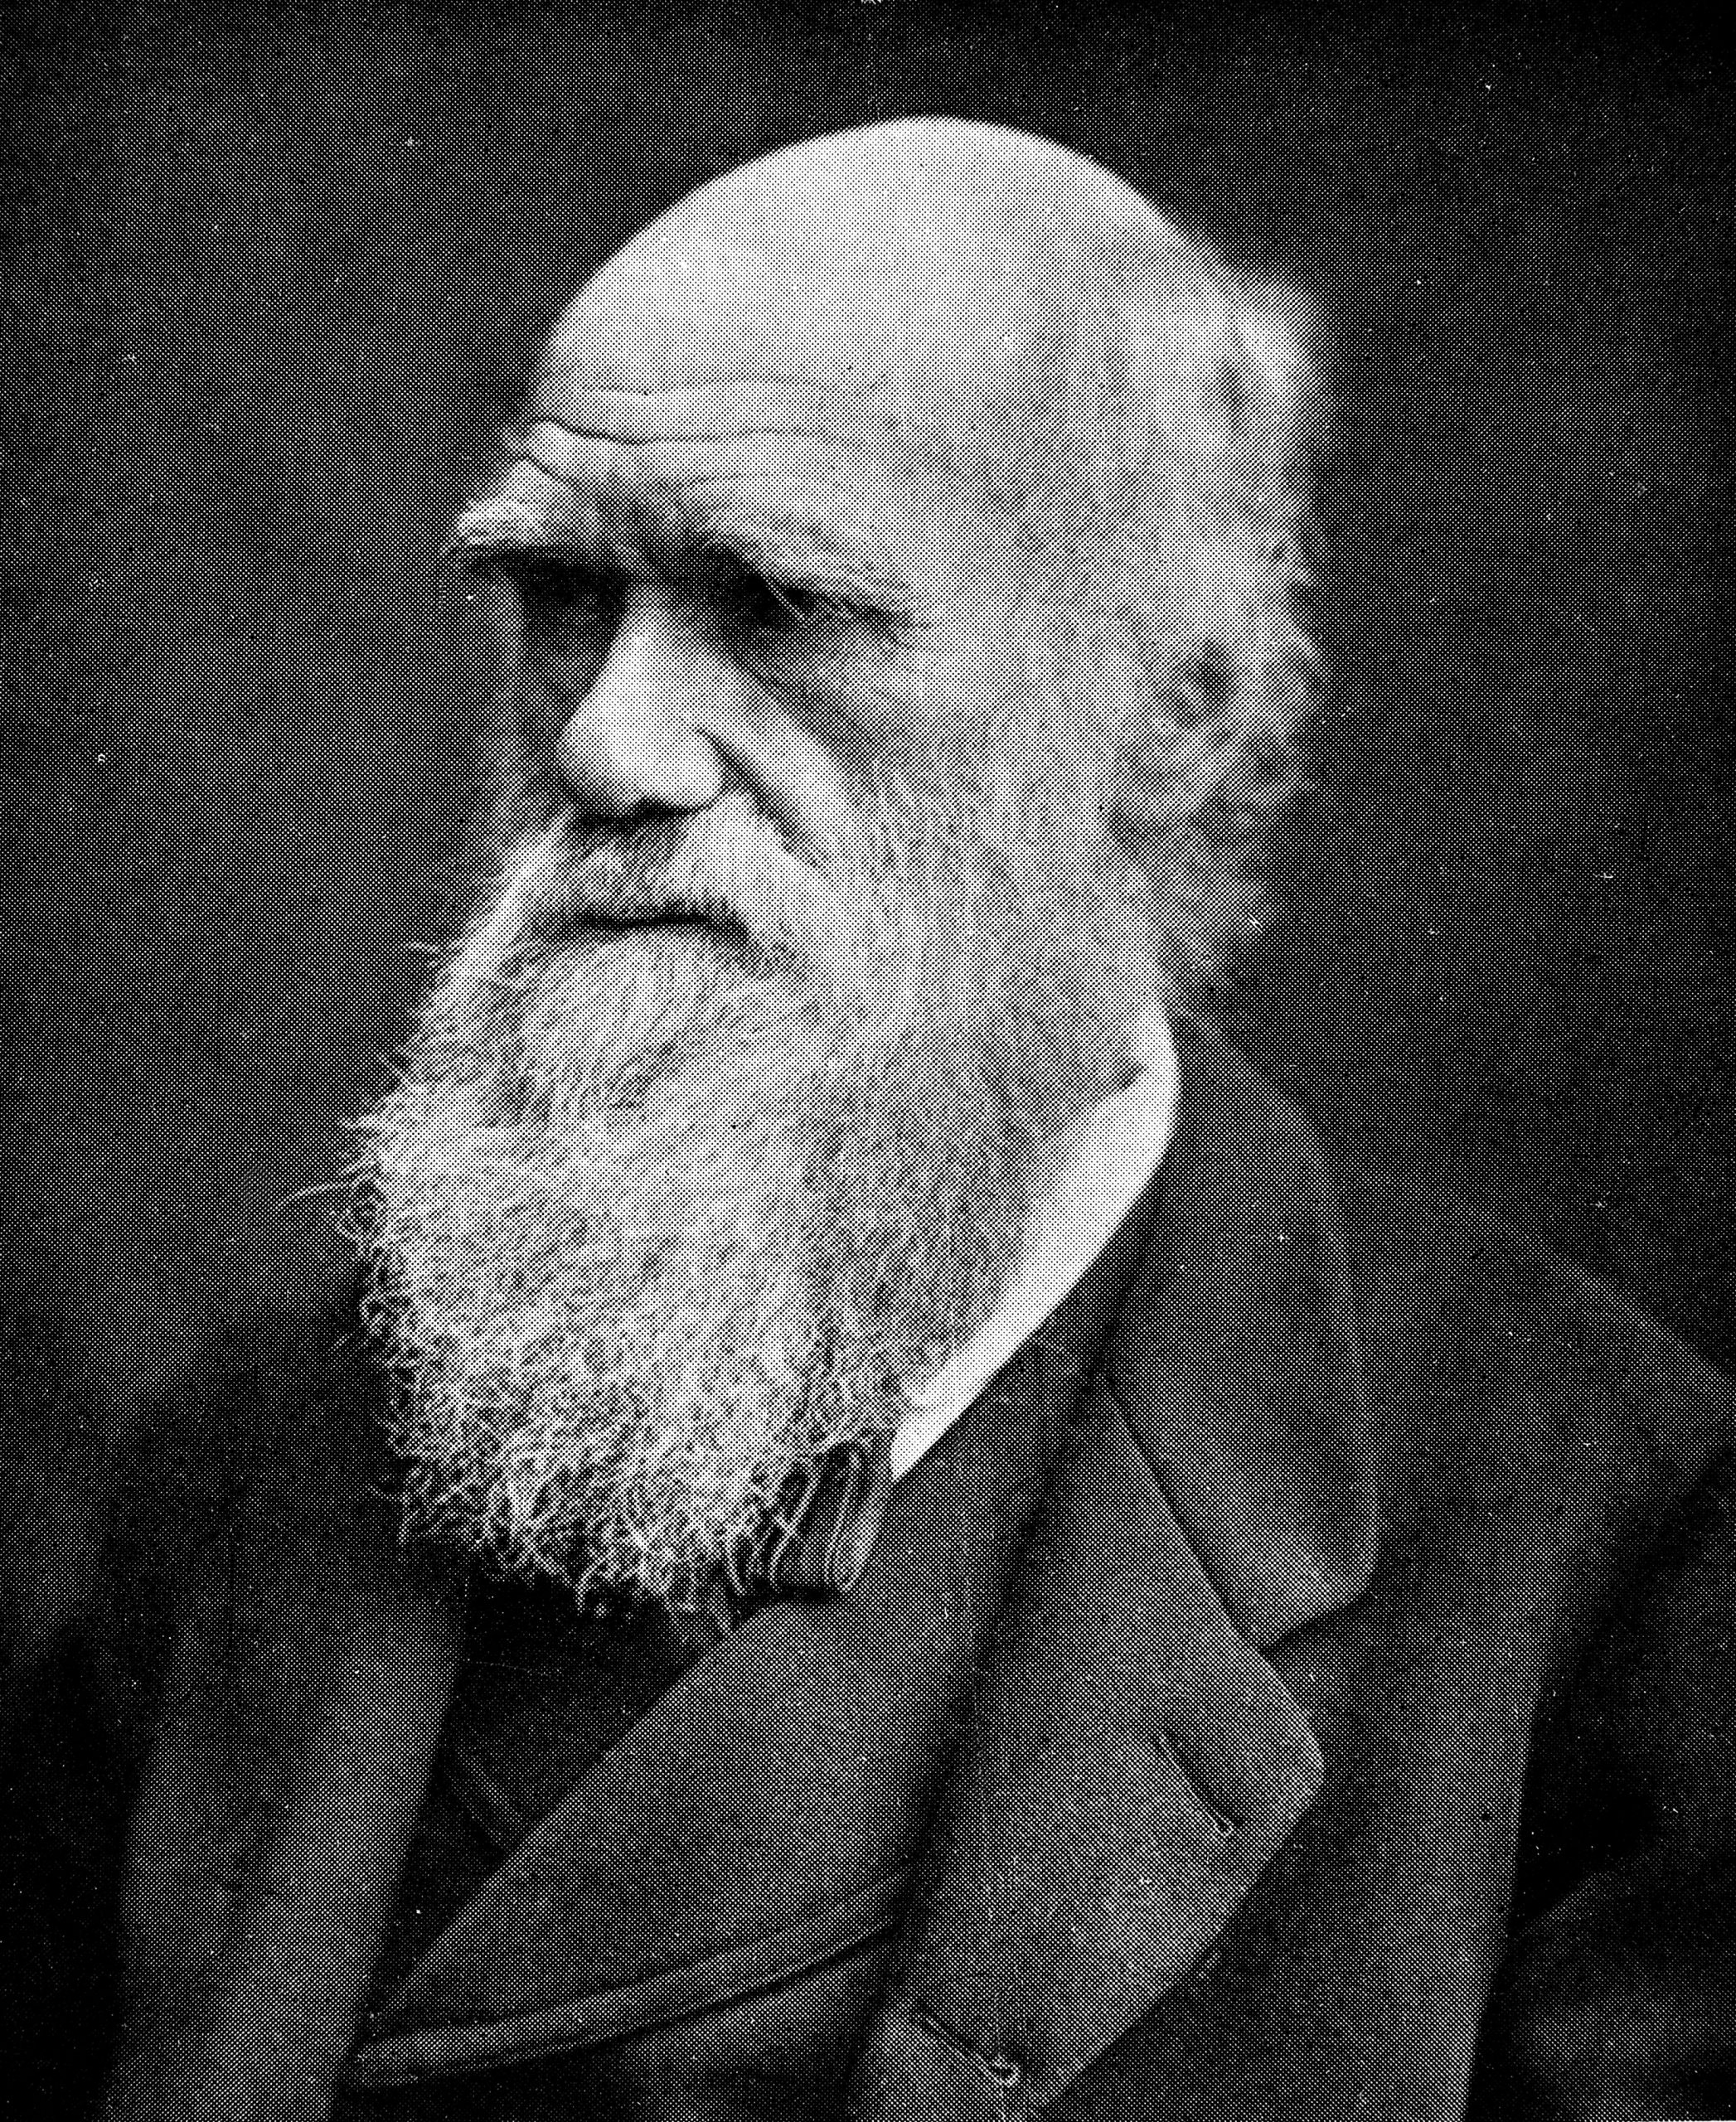 A photograph of Charles Darwin by Julia Margaret Cameron, from 1868